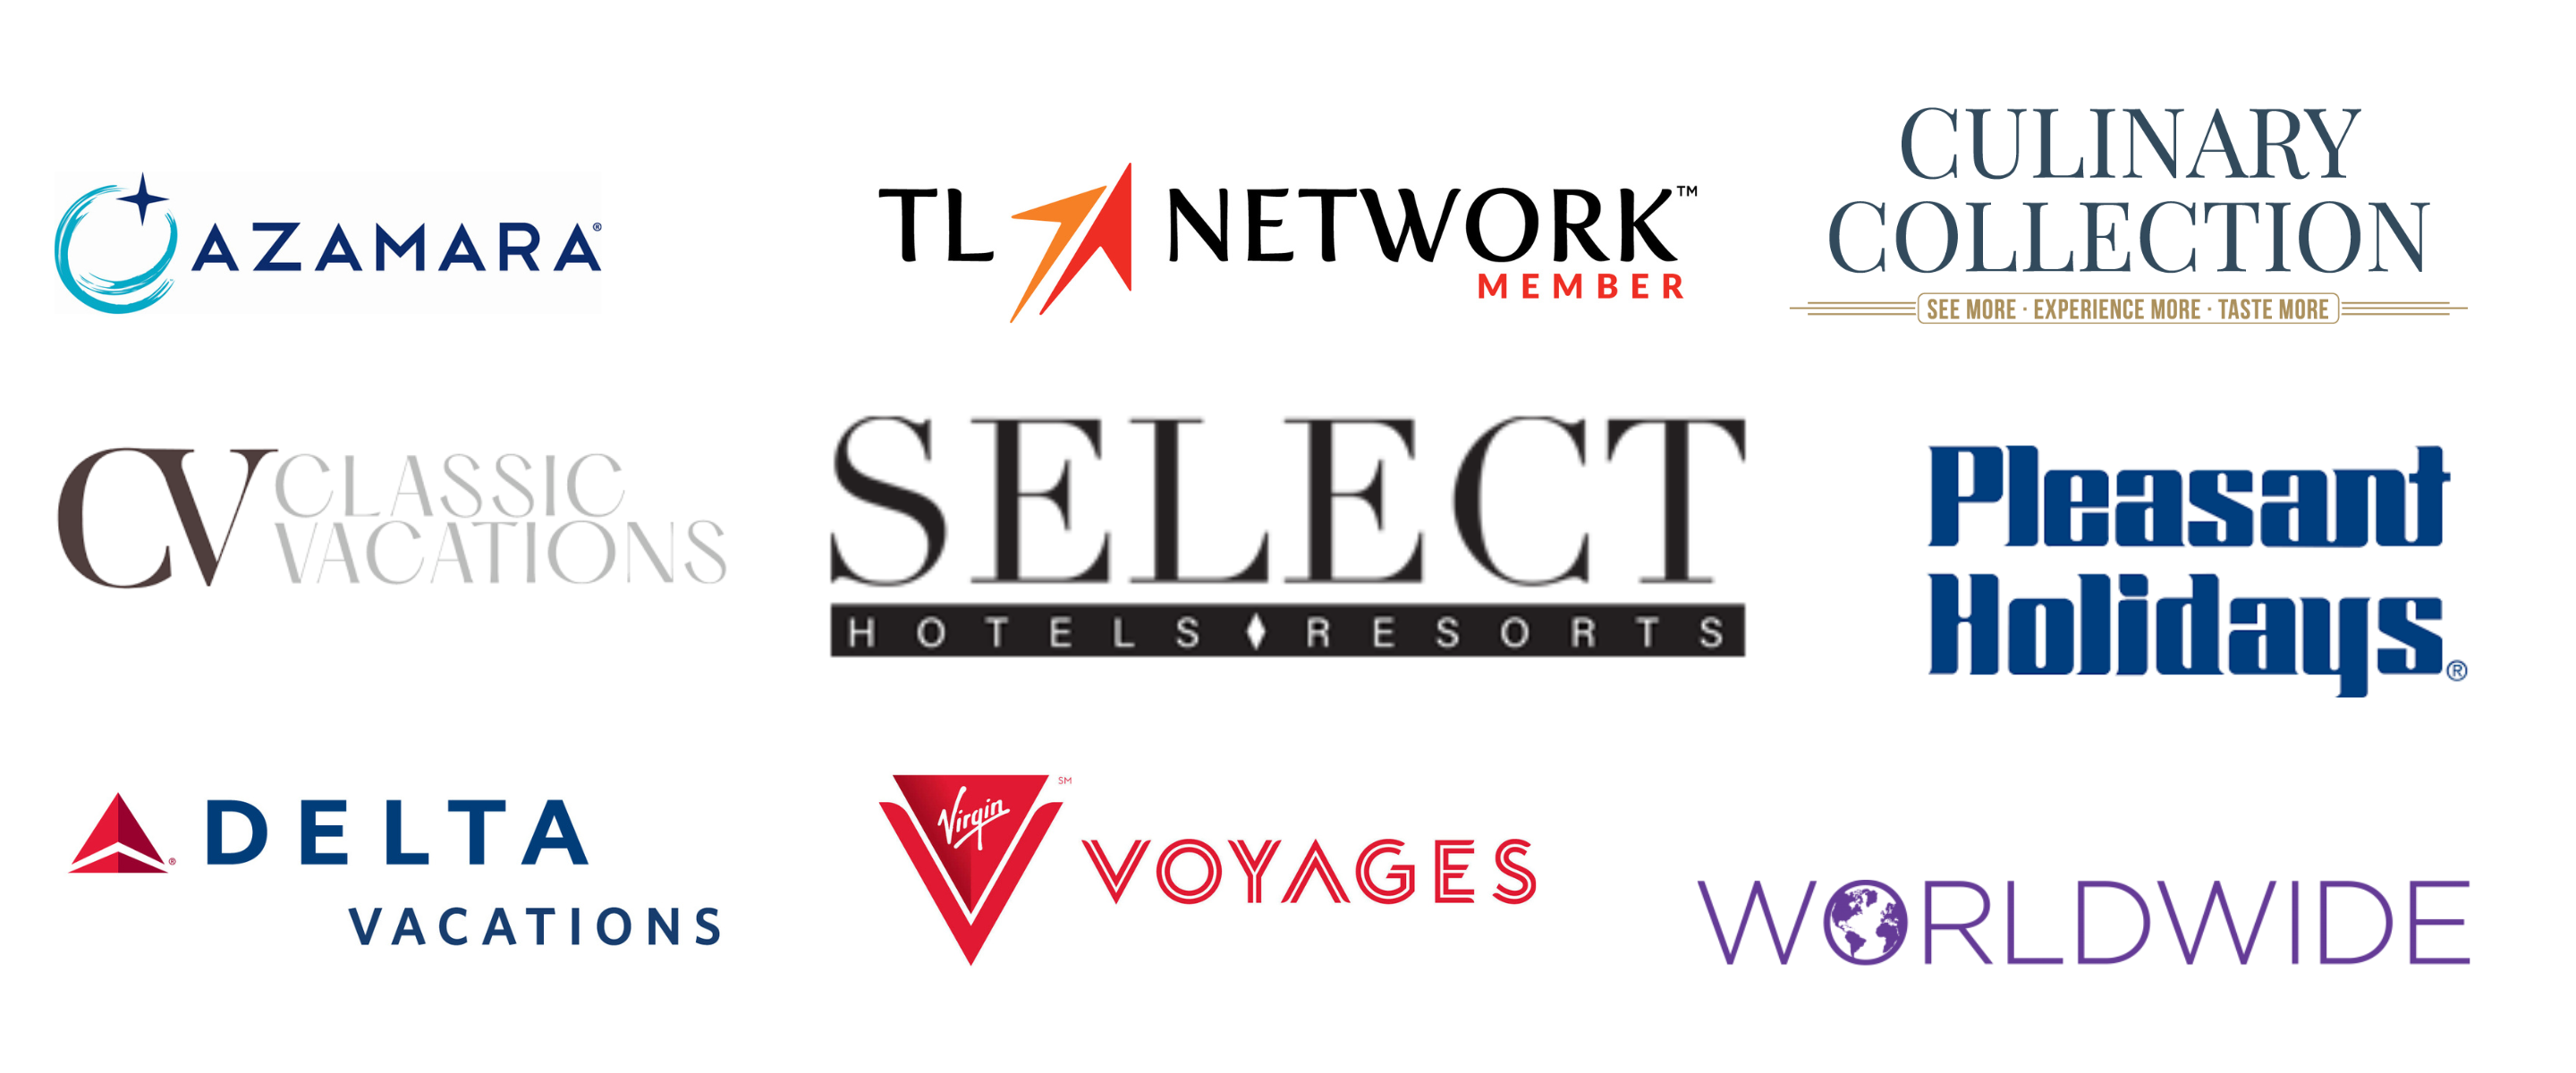 Affiliate logos - Delta, Travel Leaders Network, Virgin Voyages, Delta Vacations, Classic Vacations, Select Hotels